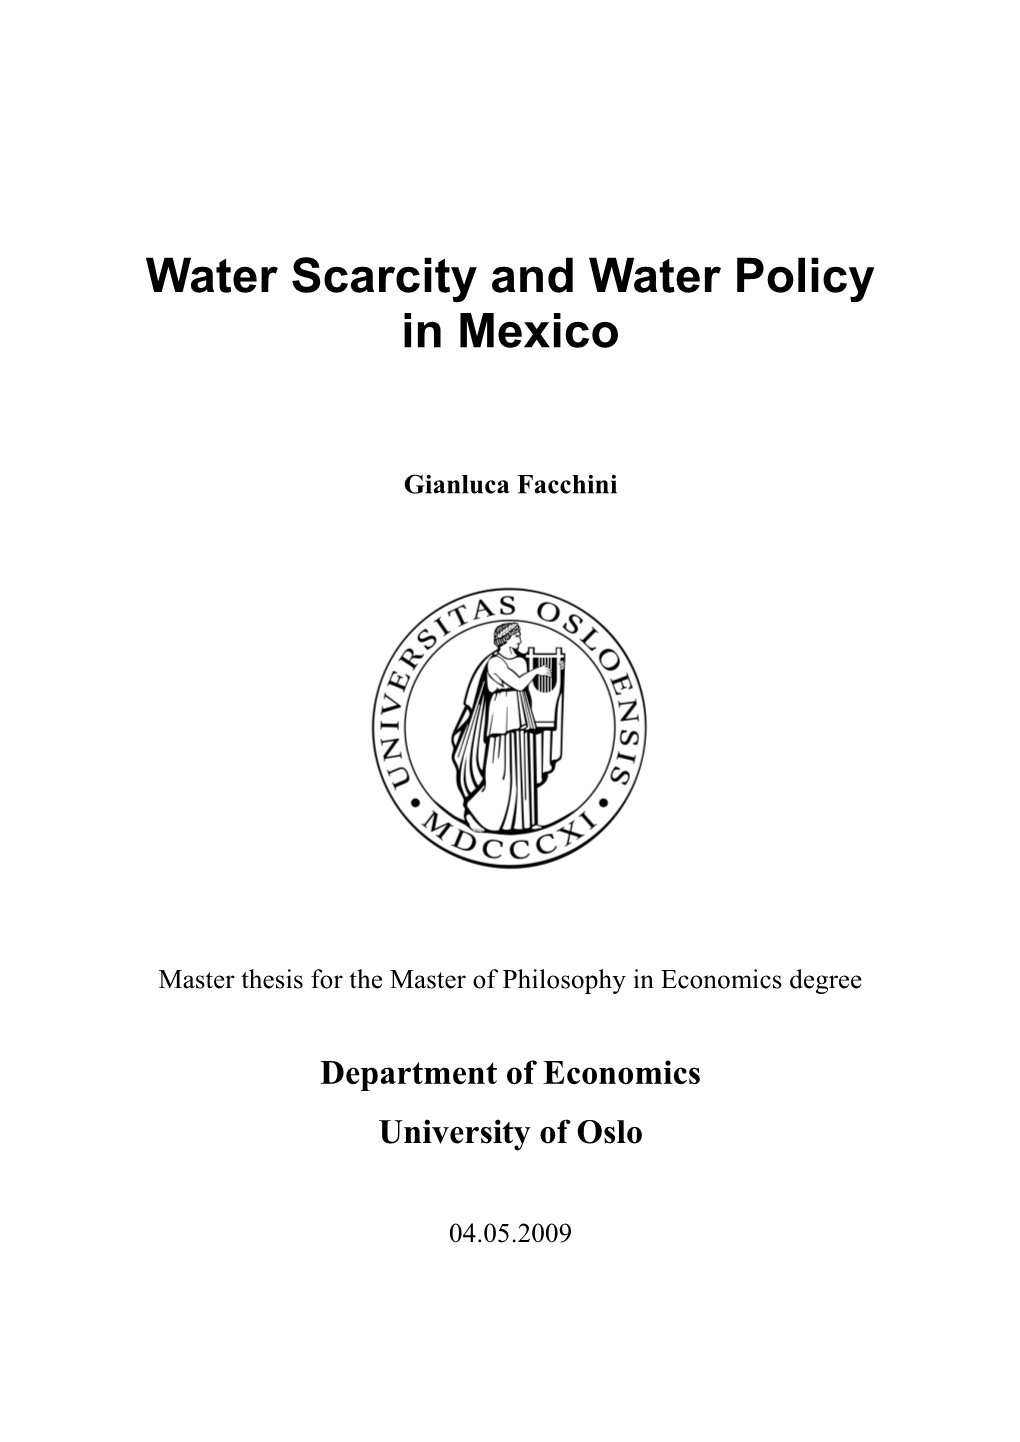 Water Scarcity and Water Policy in Mexico